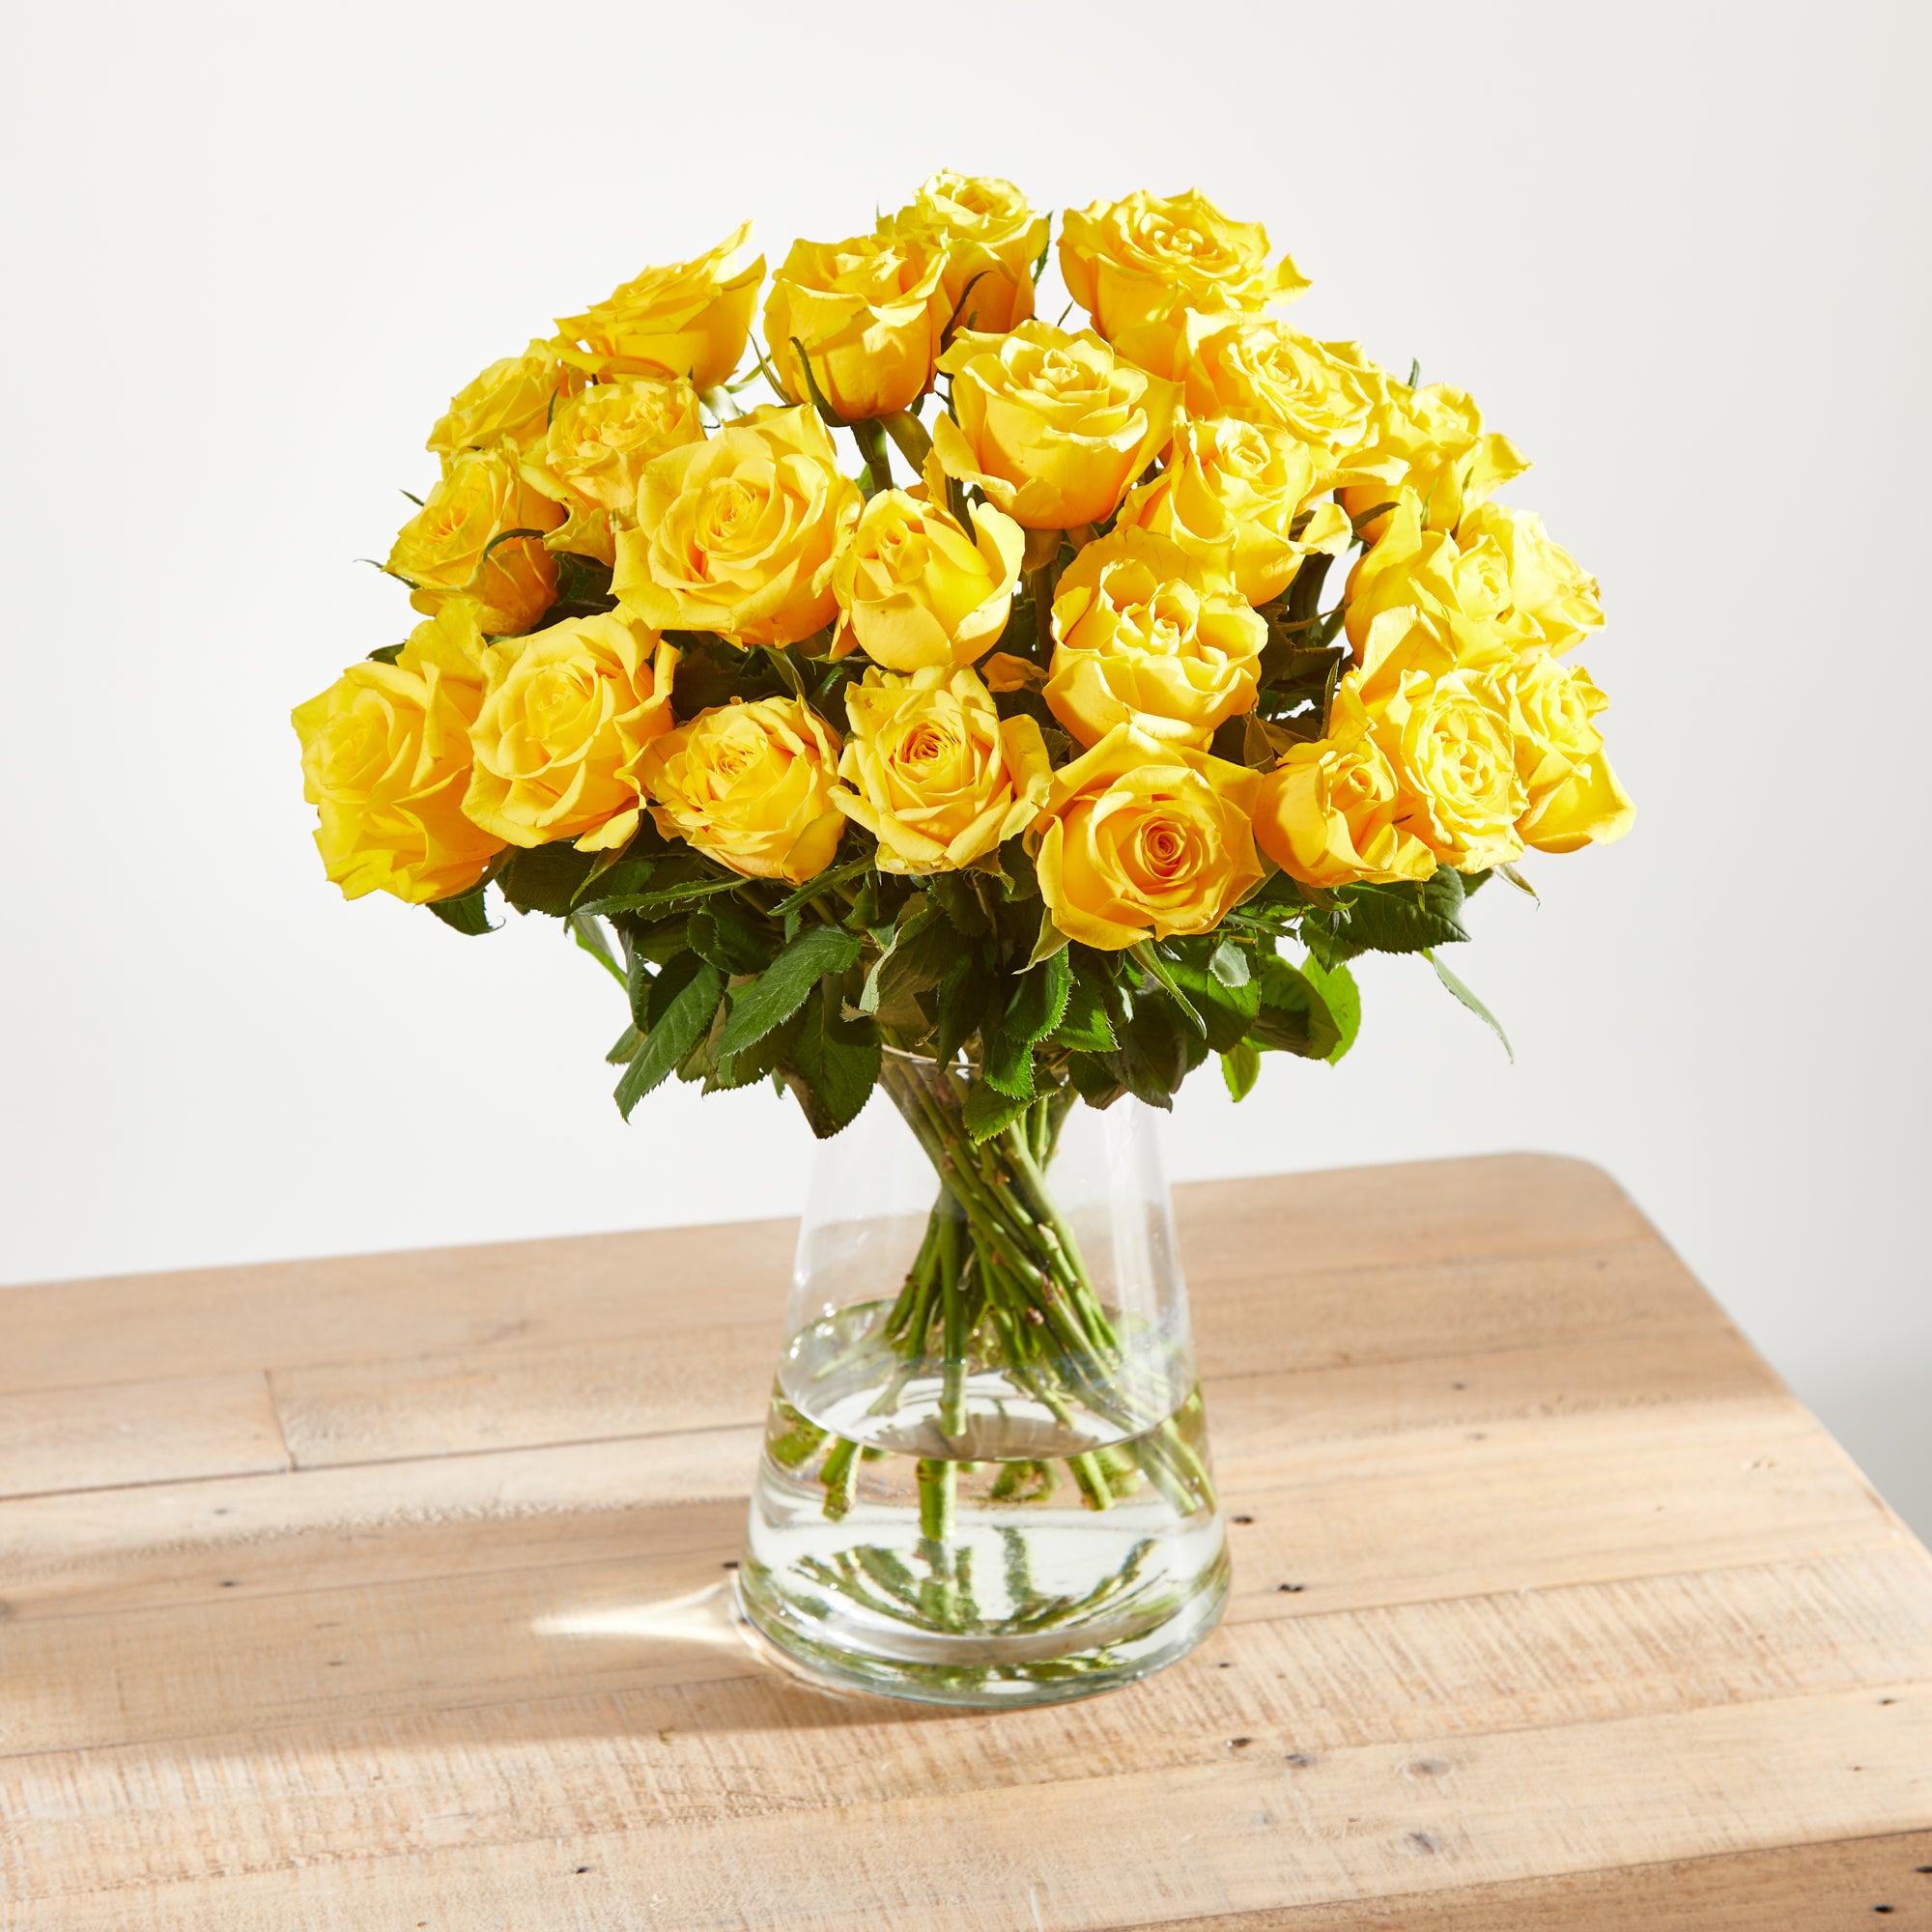 24 Fairtrade Yellow Roses image